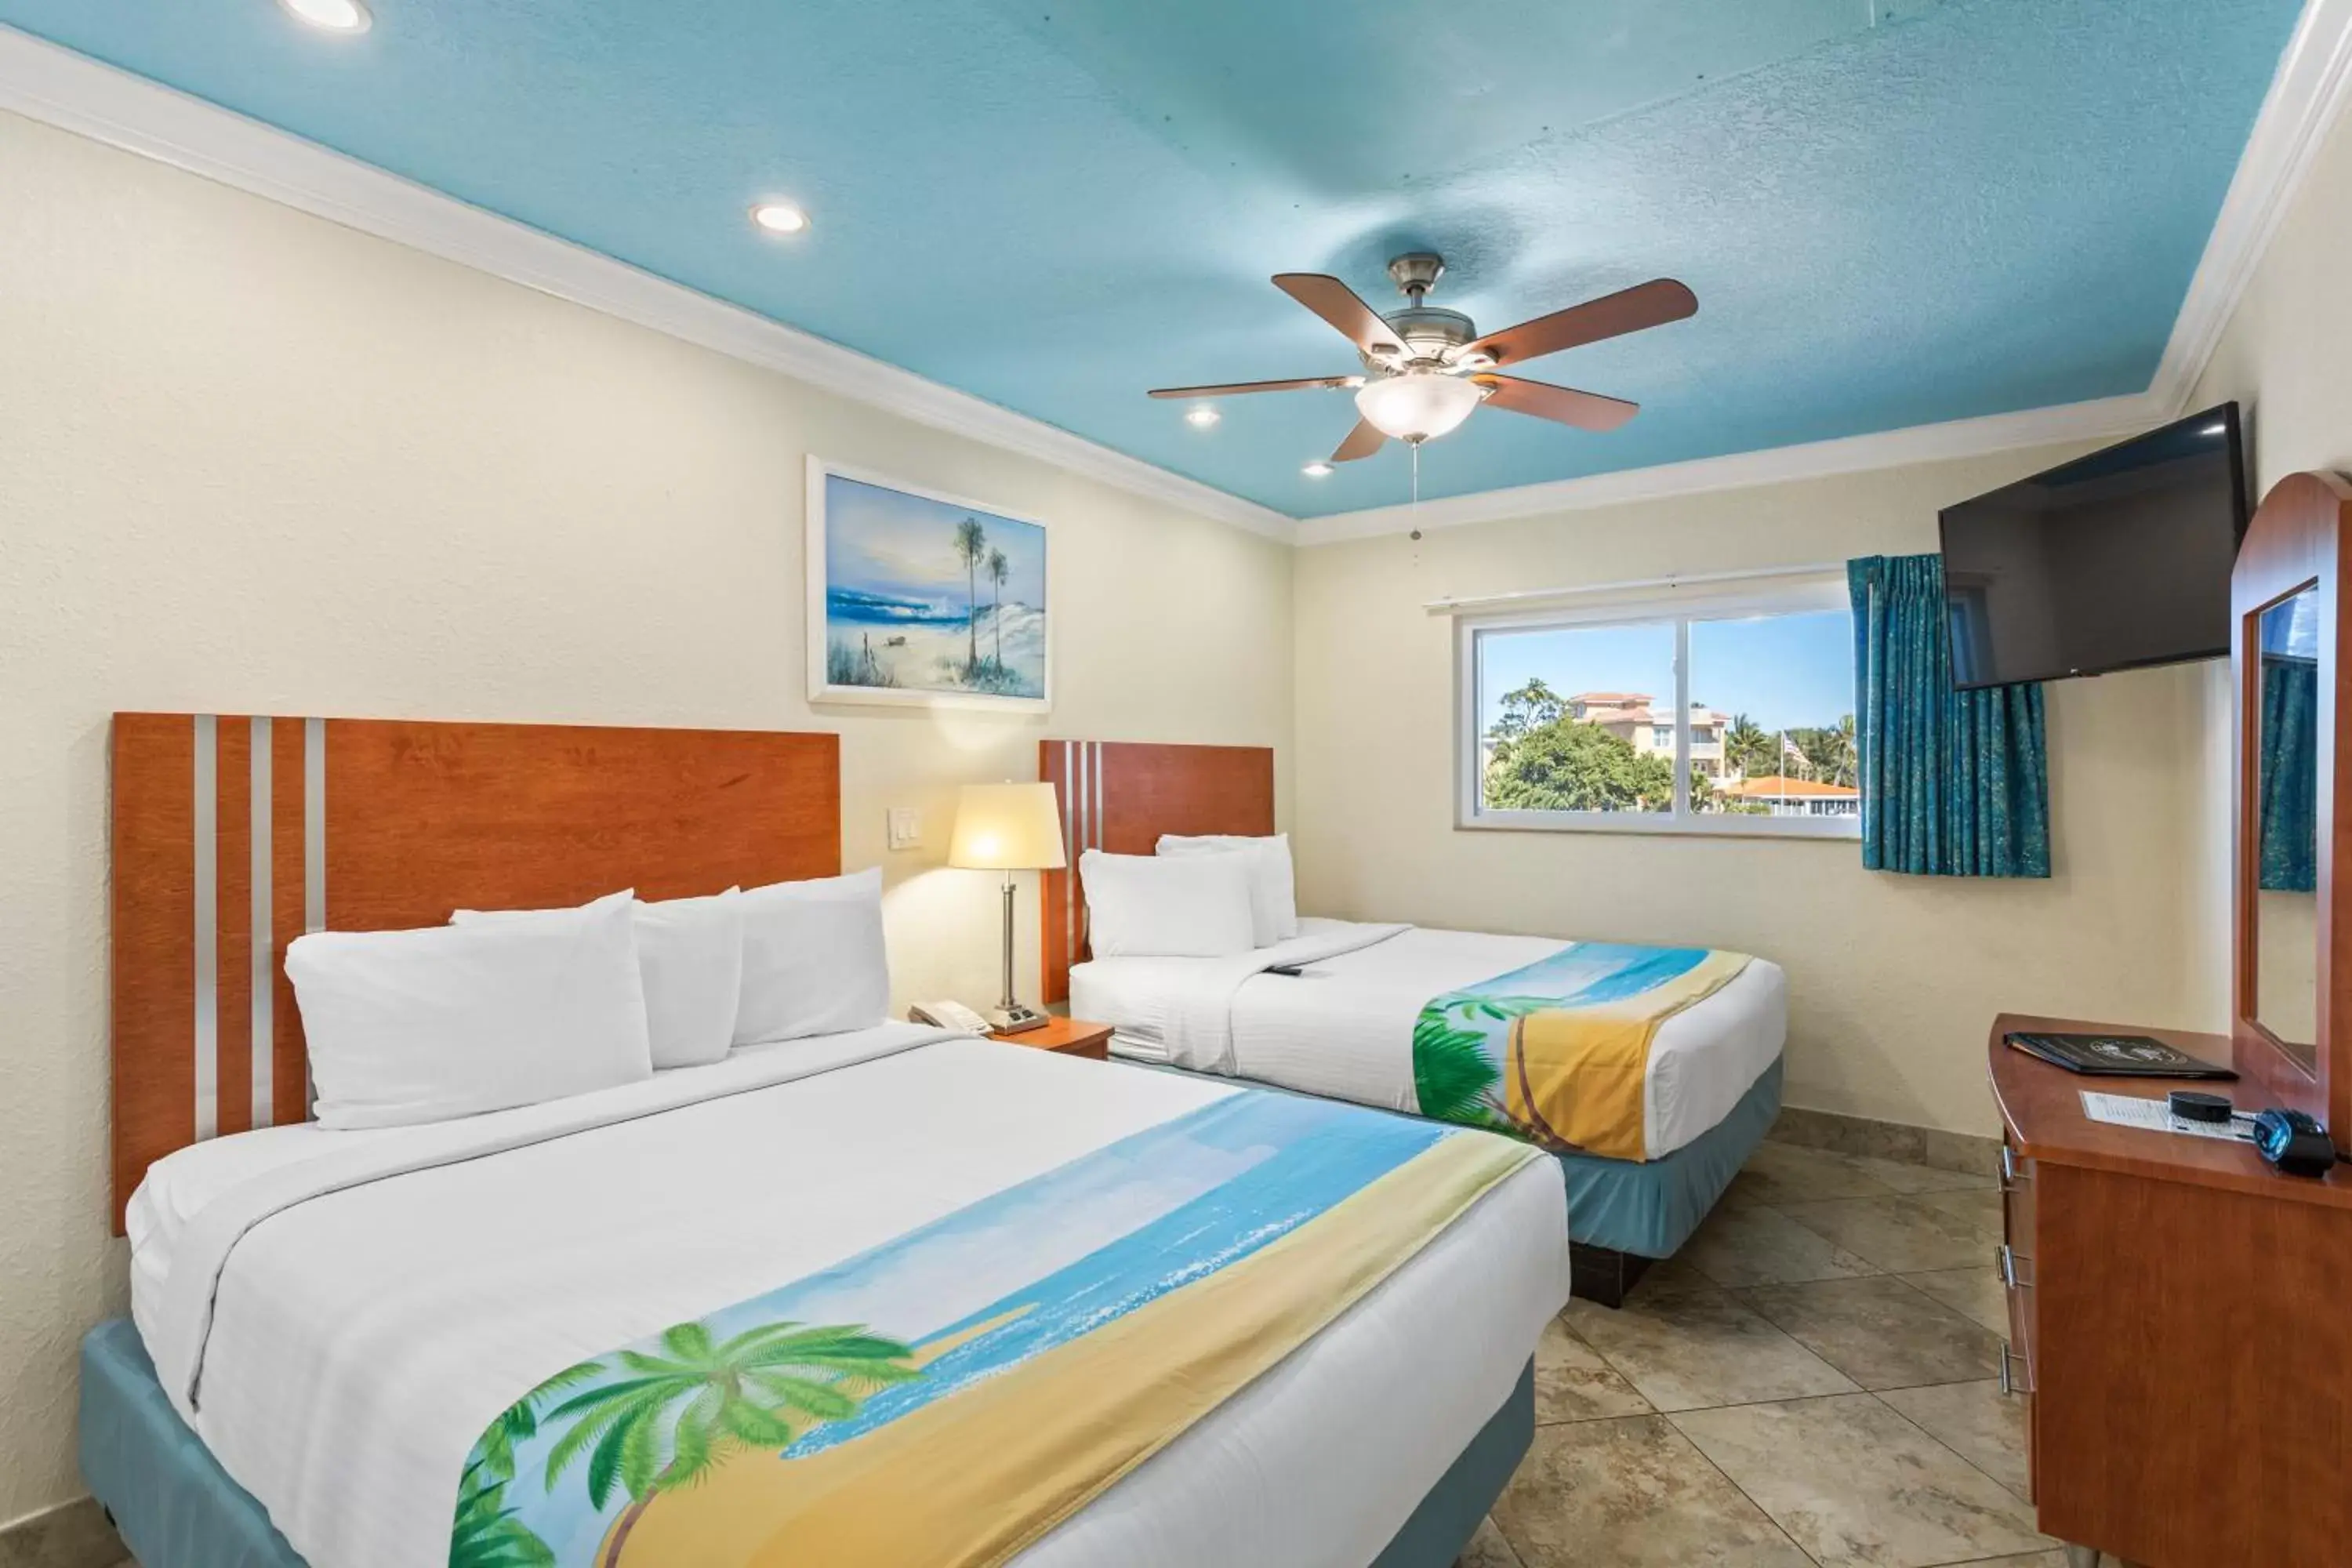 Deluxe One Bedroom Suite: 2 Queen Beds and 2 Sleeper Sofas in Bay Palms Waterfront Resort - Hotel and Marina